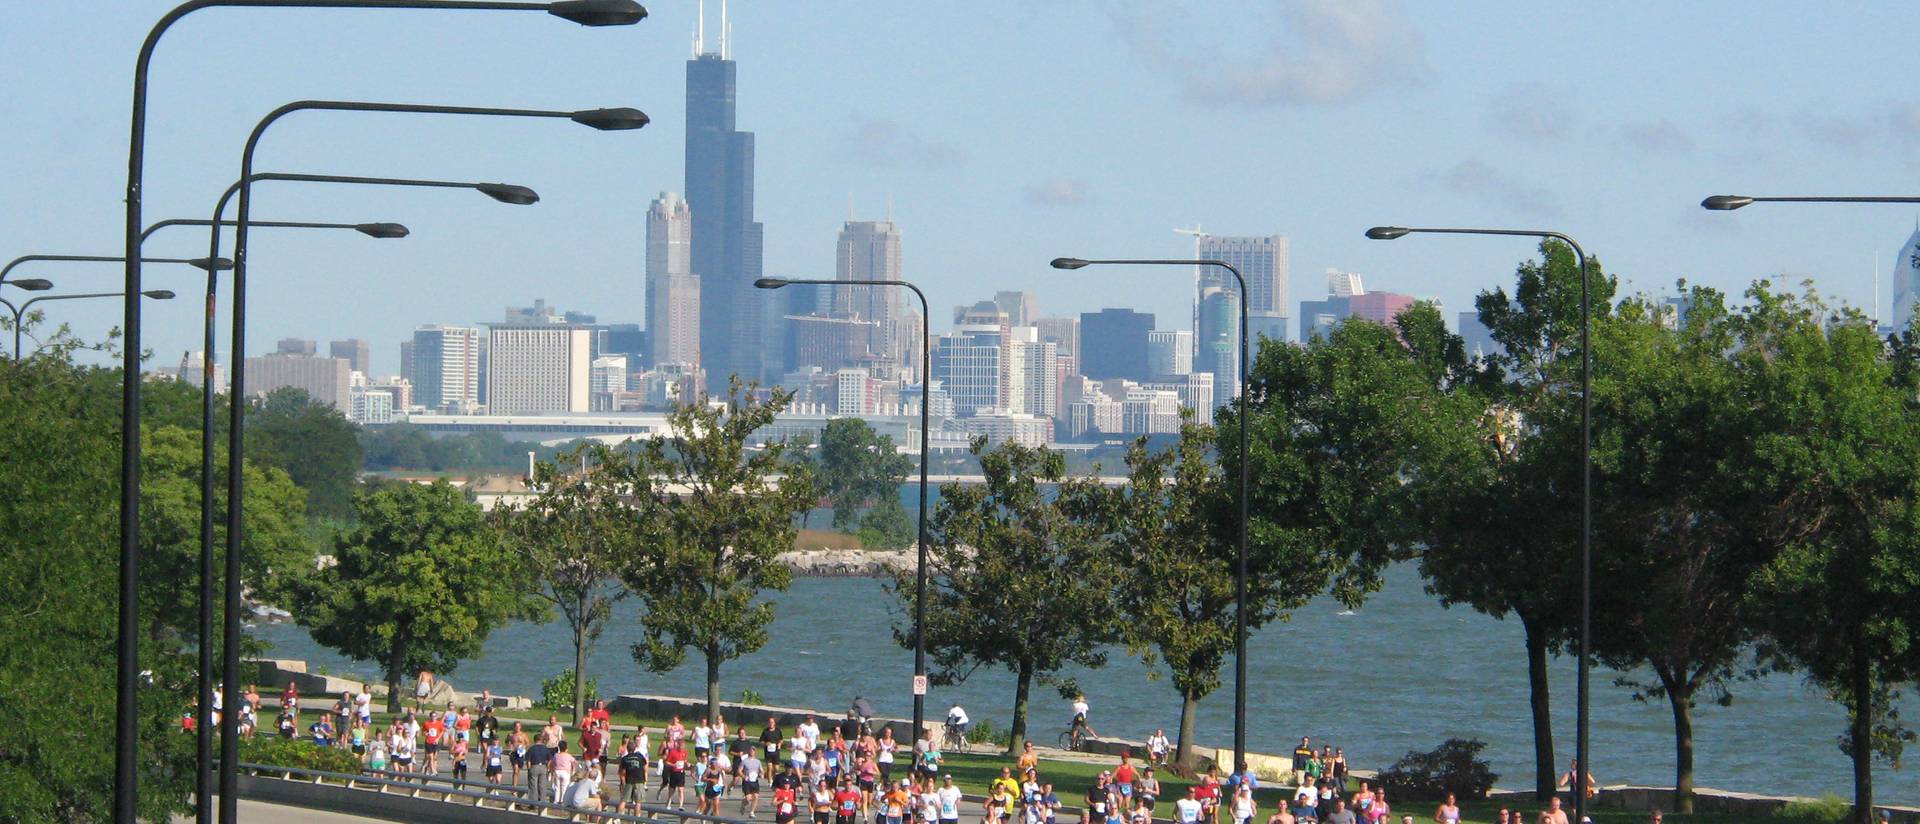 Participants race during the Chicago Marathon with the city skyline in the background.